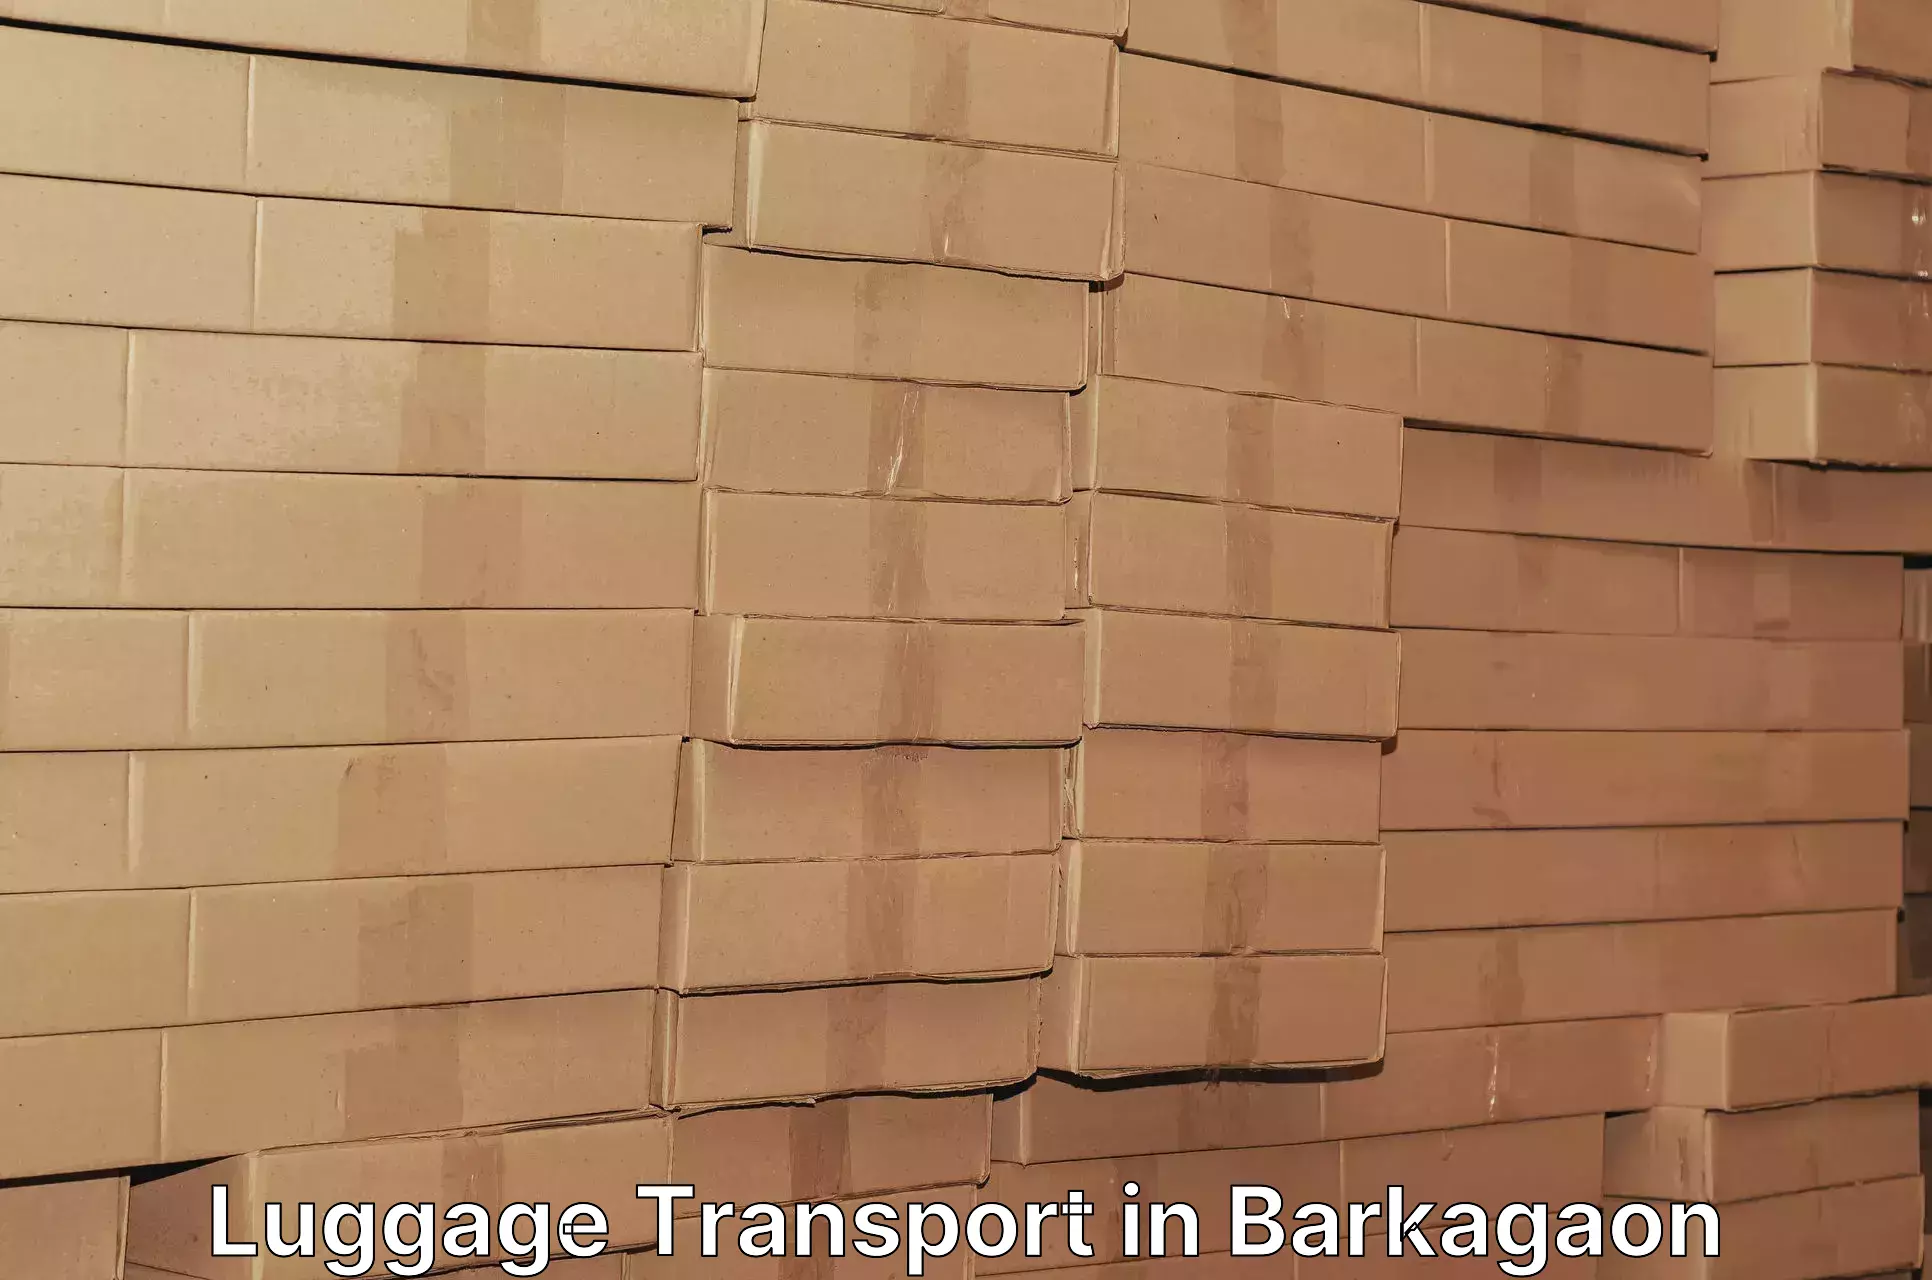 Baggage delivery technology in Barkagaon